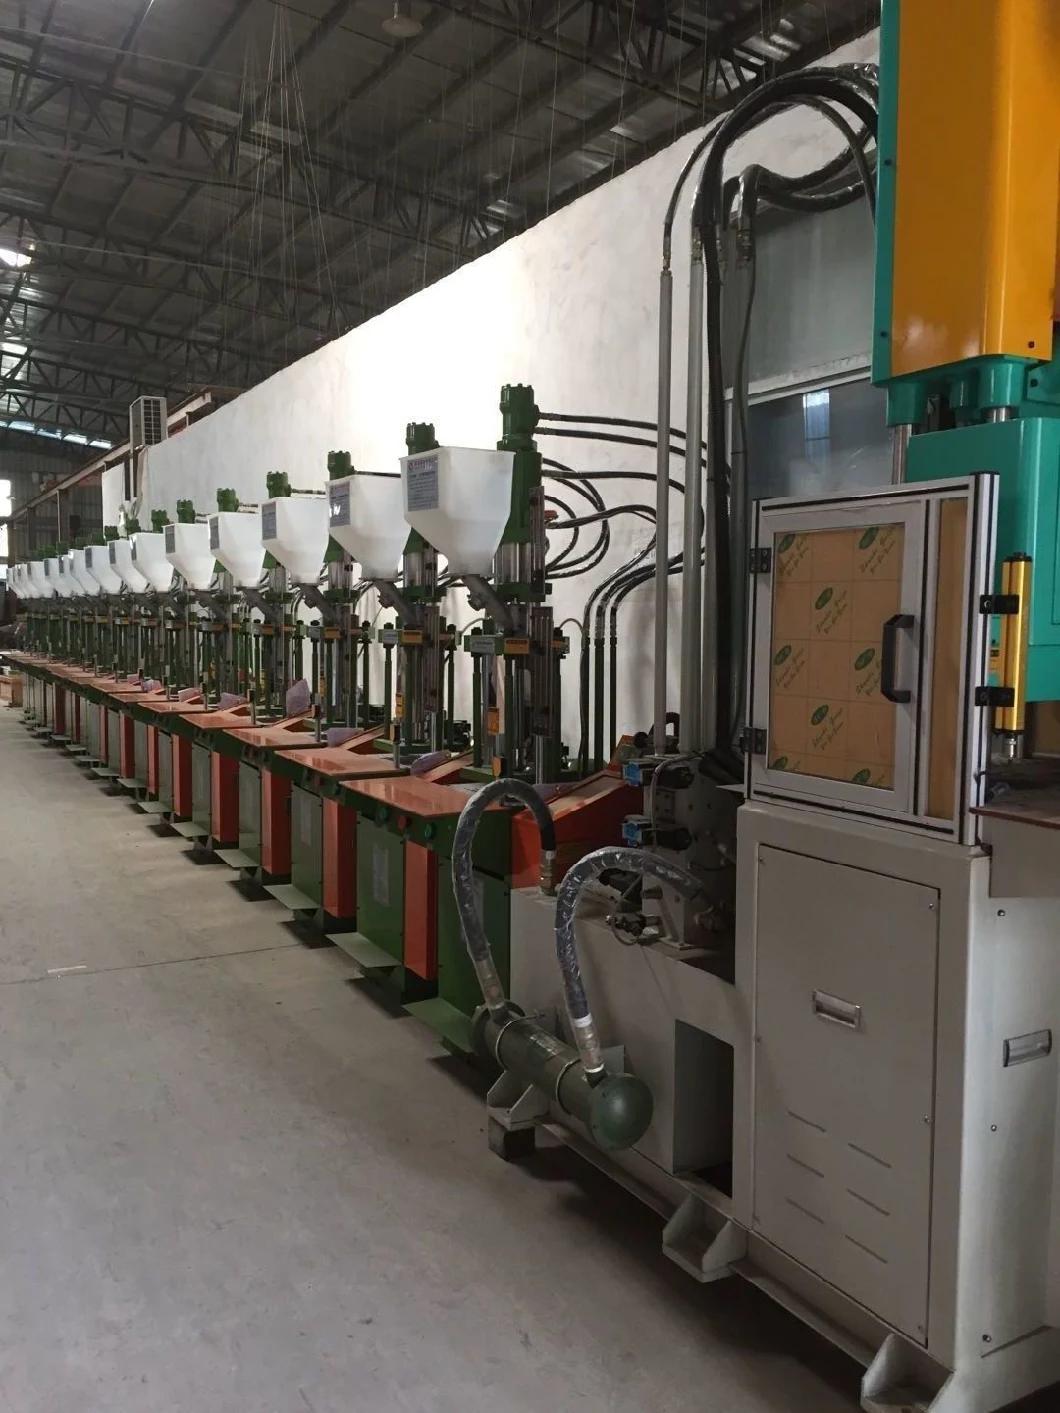 Vertical Thermoplastic Tube Head Injection Molding Machine